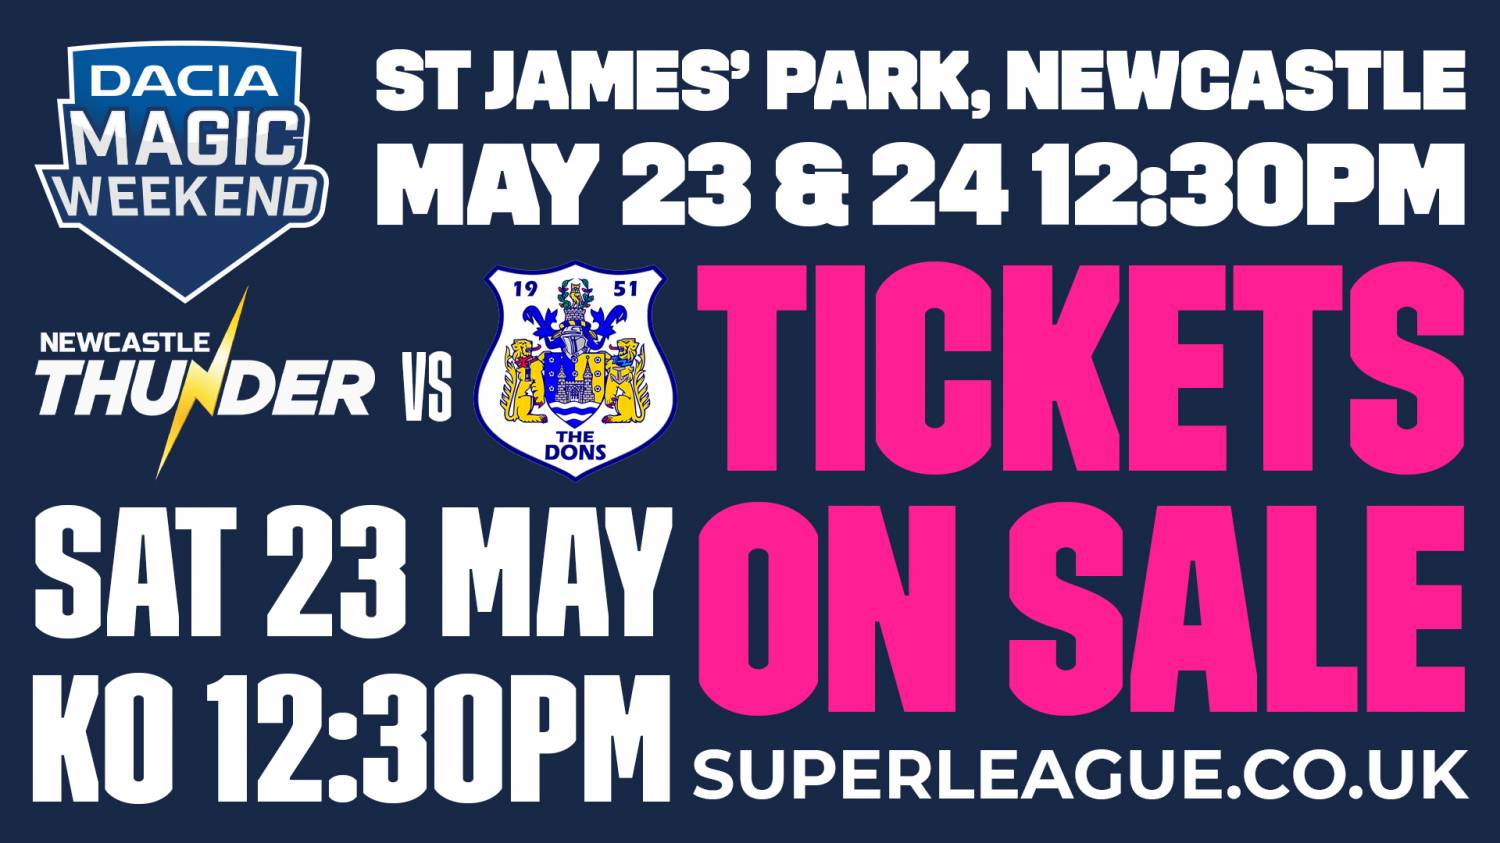 NEWS Magic Weekend tickets available